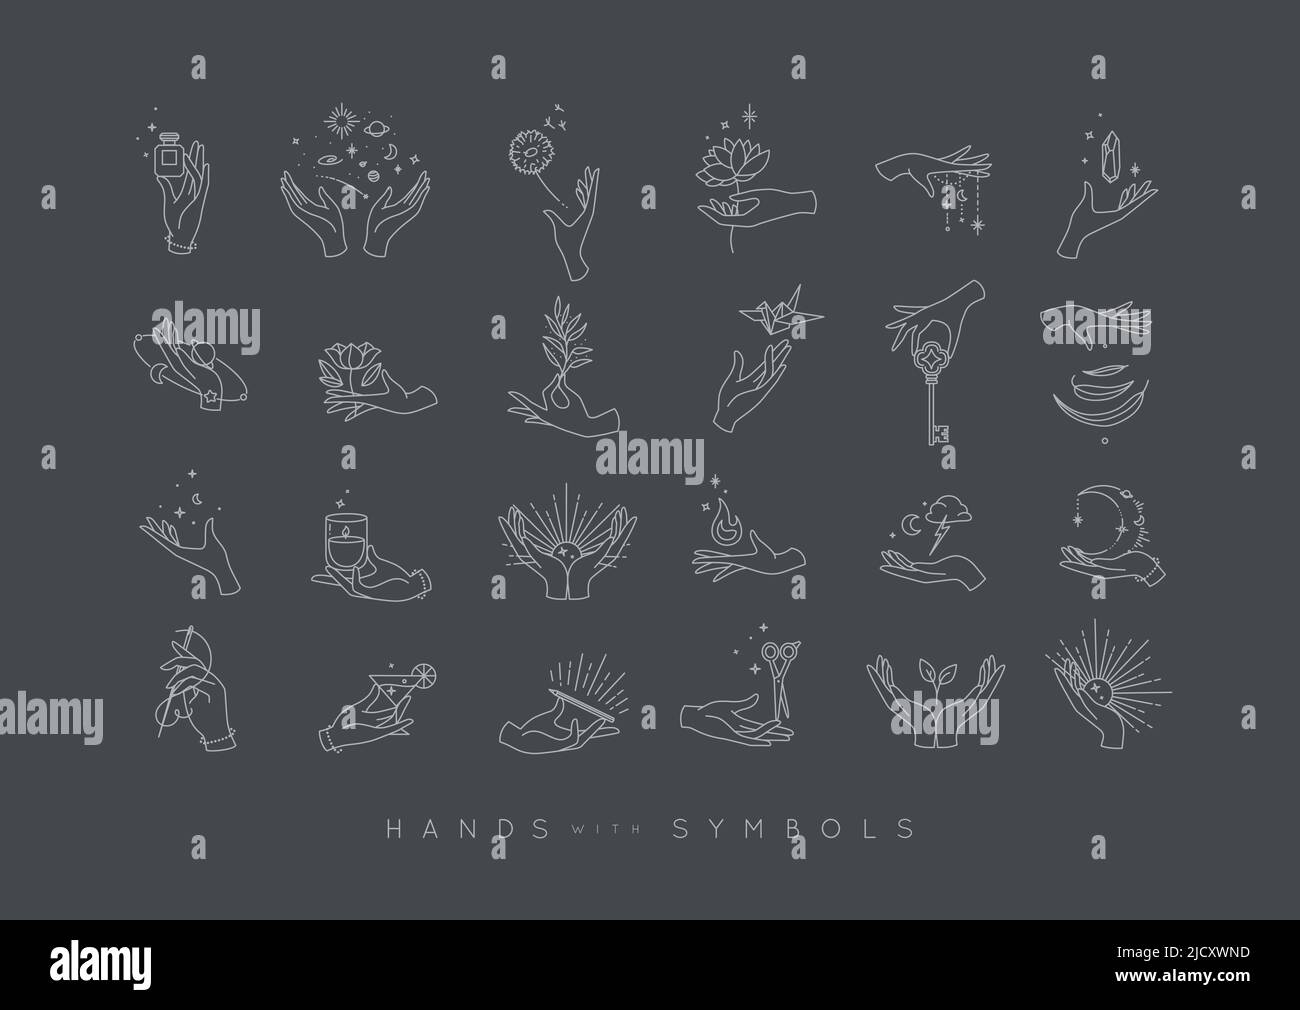 Hands in different positions with symbols and elements moon, sun, flowers, perfume, fire, cocktail, origami, key, stone, leaf, drawing in line style o Stock Vector